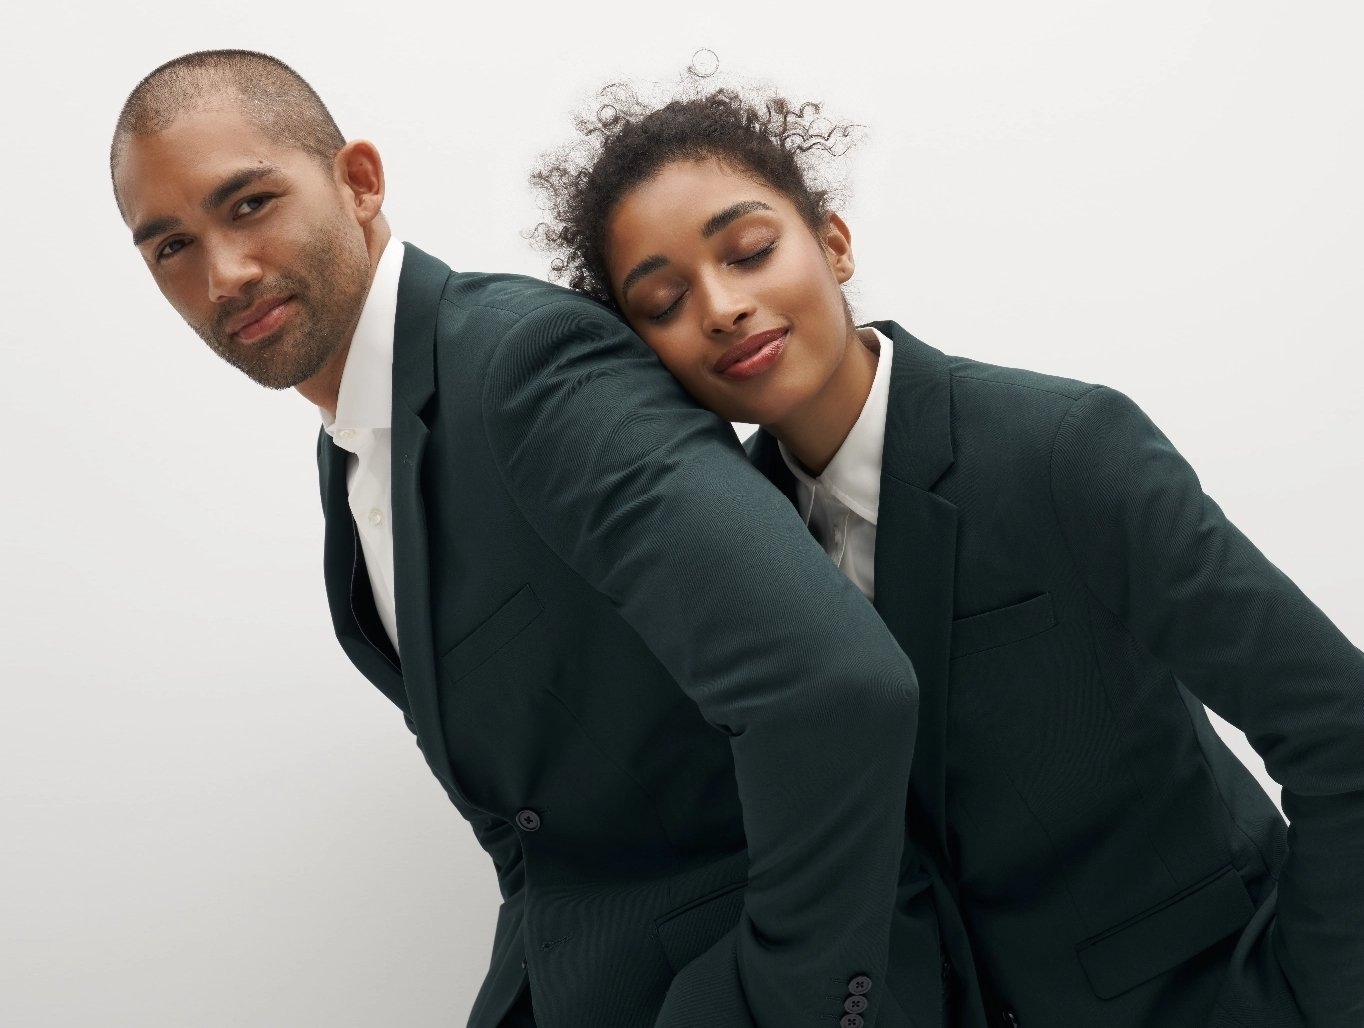 Man and woman in hunter green suits with dreamy facial expressions because of comfortable fitting suit.